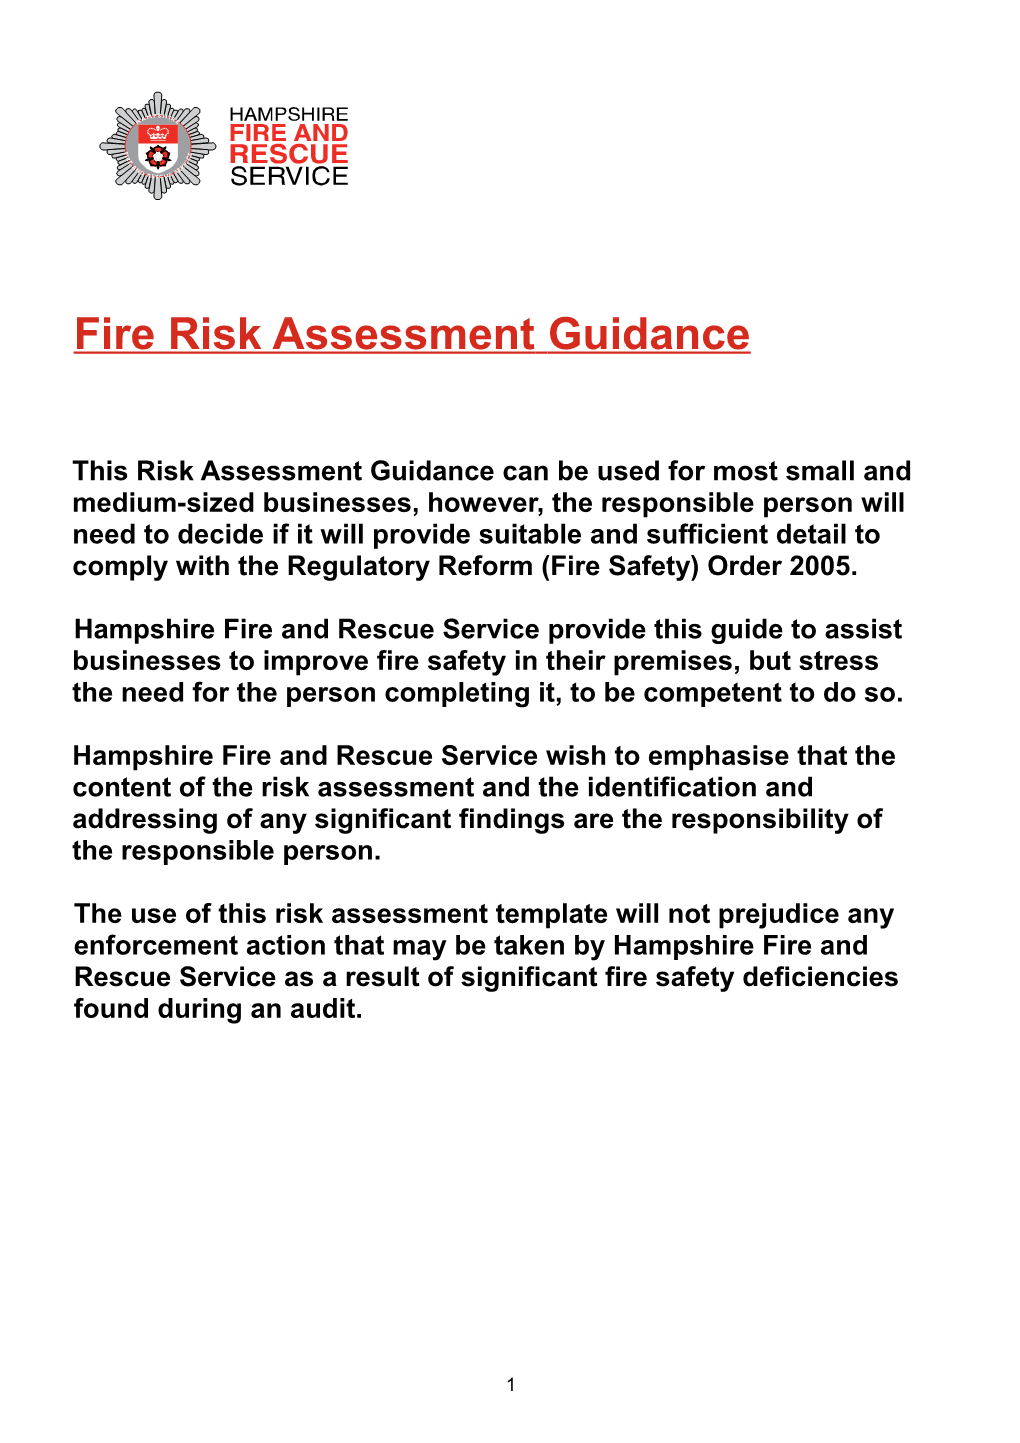 This Risk Assessment Template Can Be Used for Most Small and Medium-Sized Businesses, However